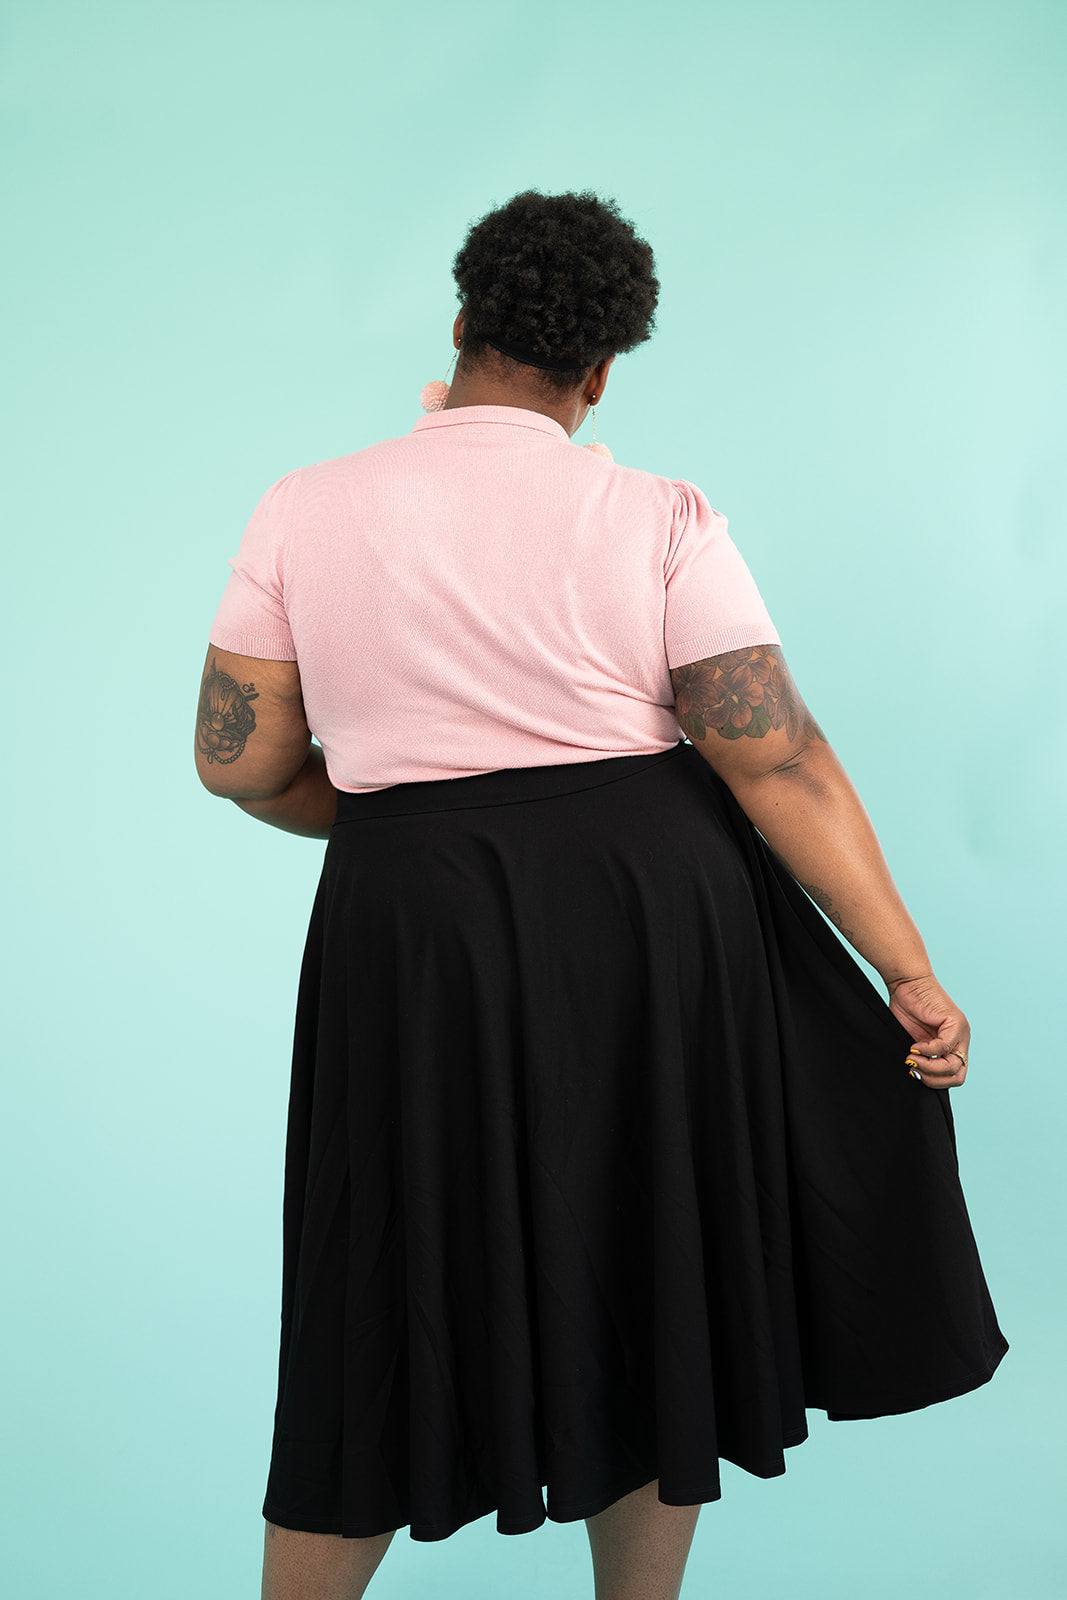 A black woman is facing away from the camera and modelling her skirt. She is wearing a pink top and pompom earrings and a black skirt.